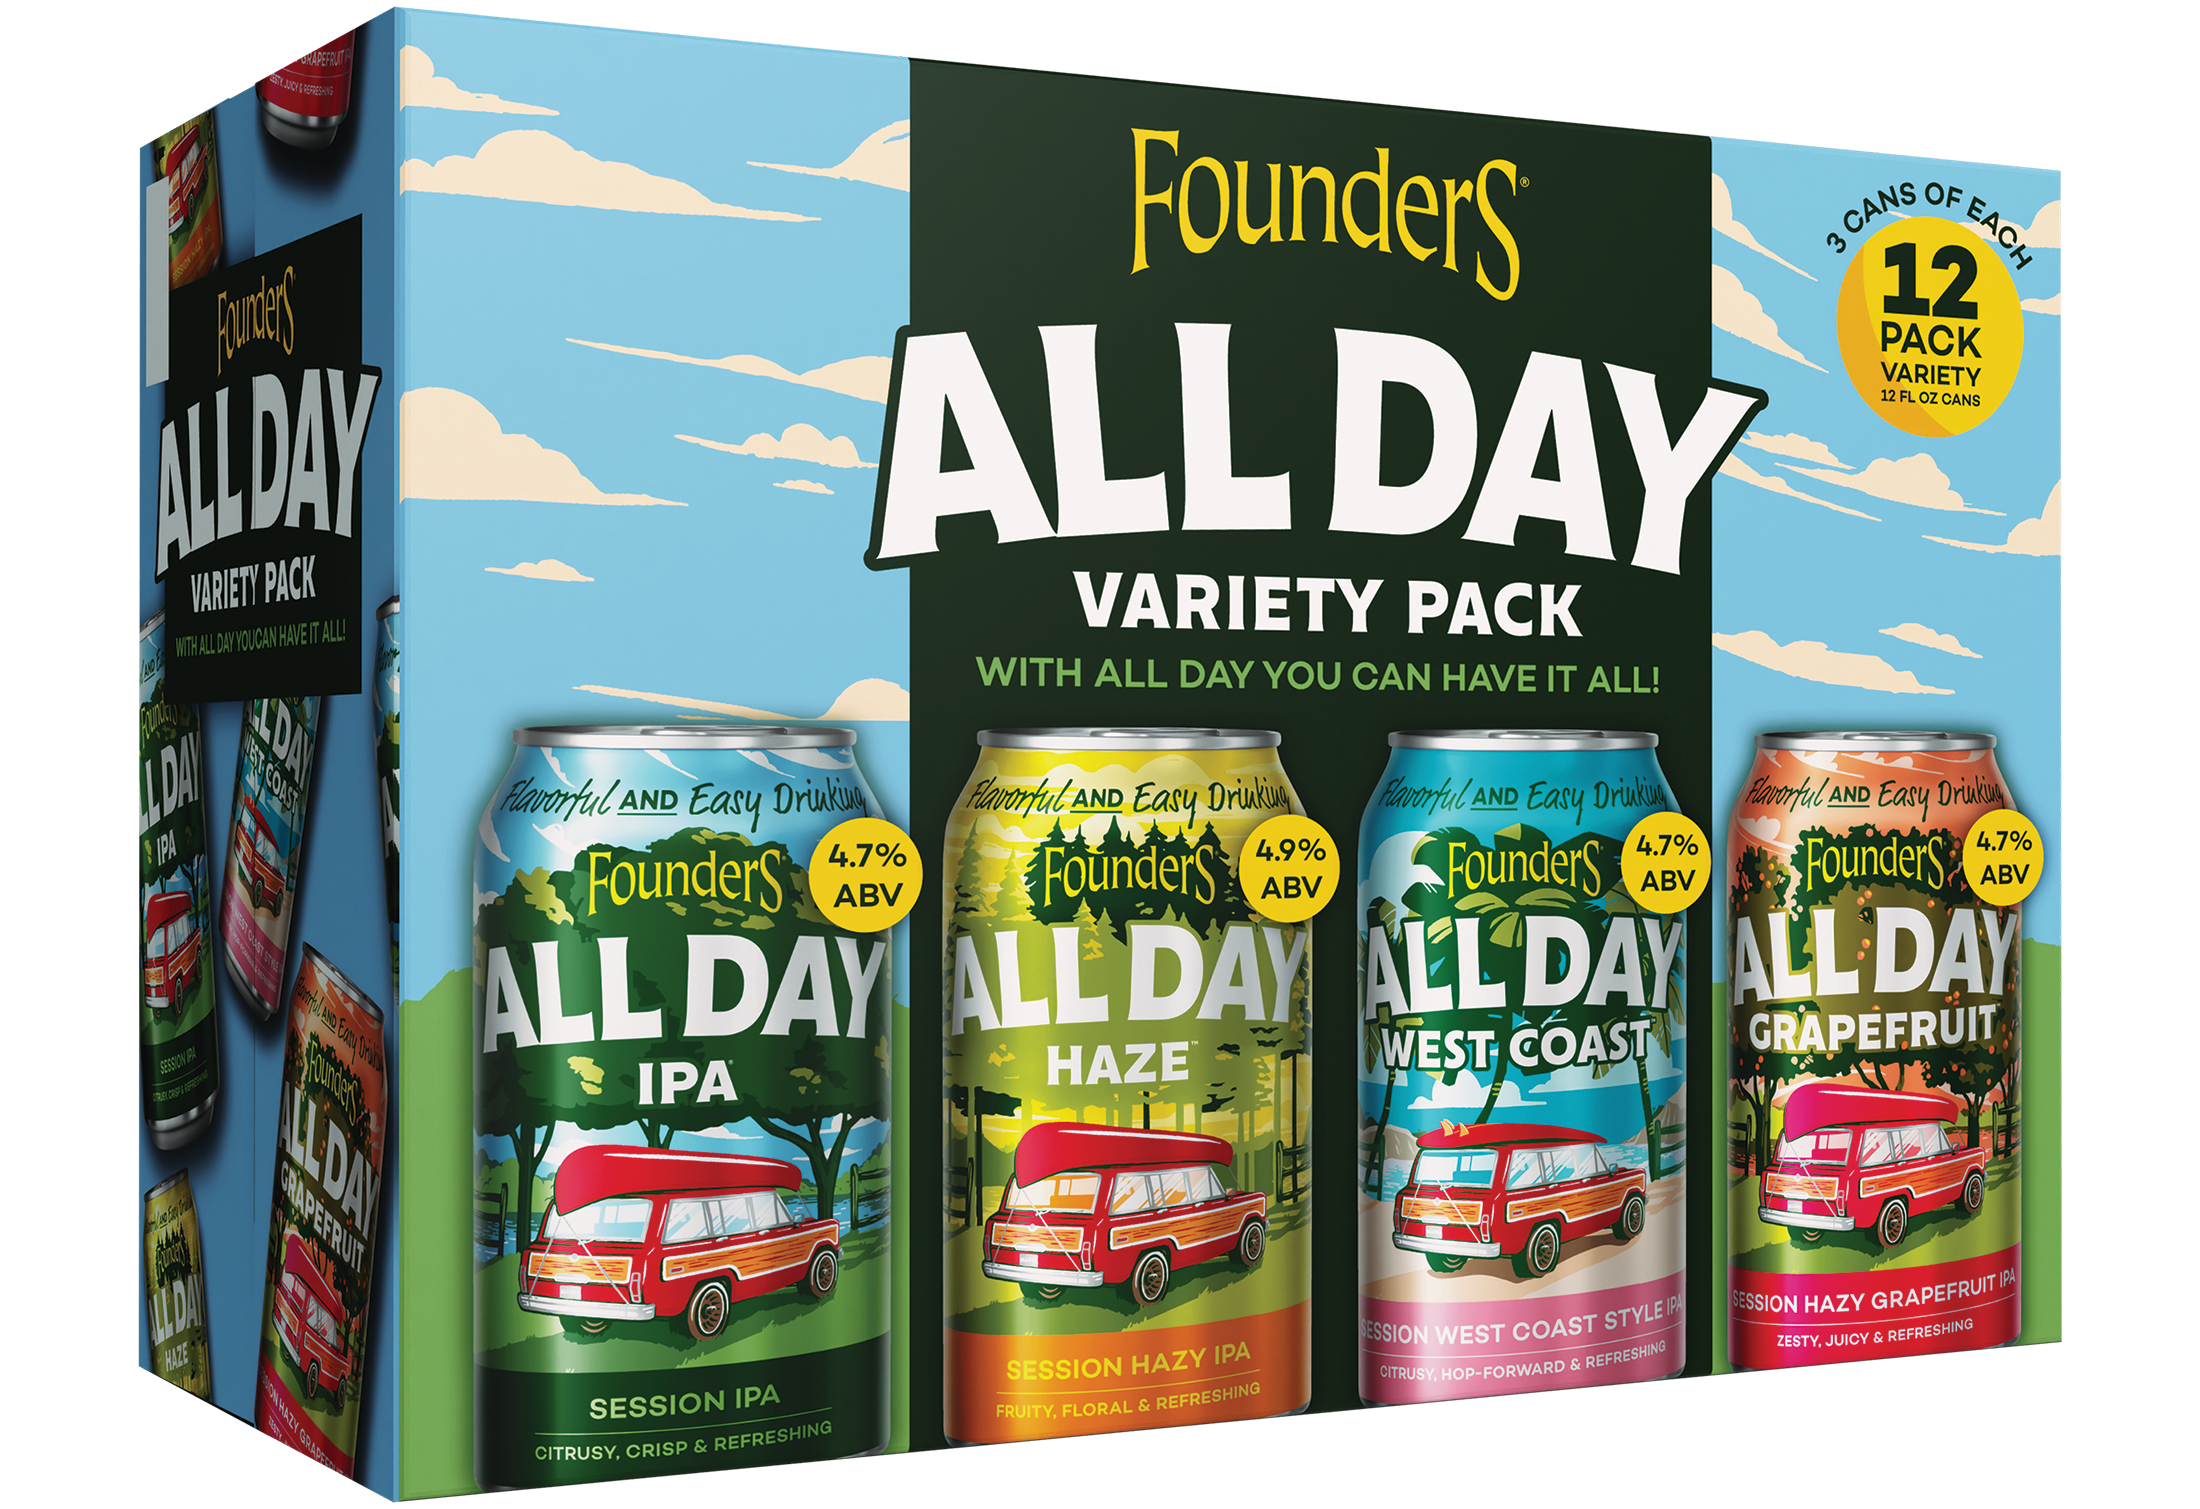 All Day Variety Pack #3